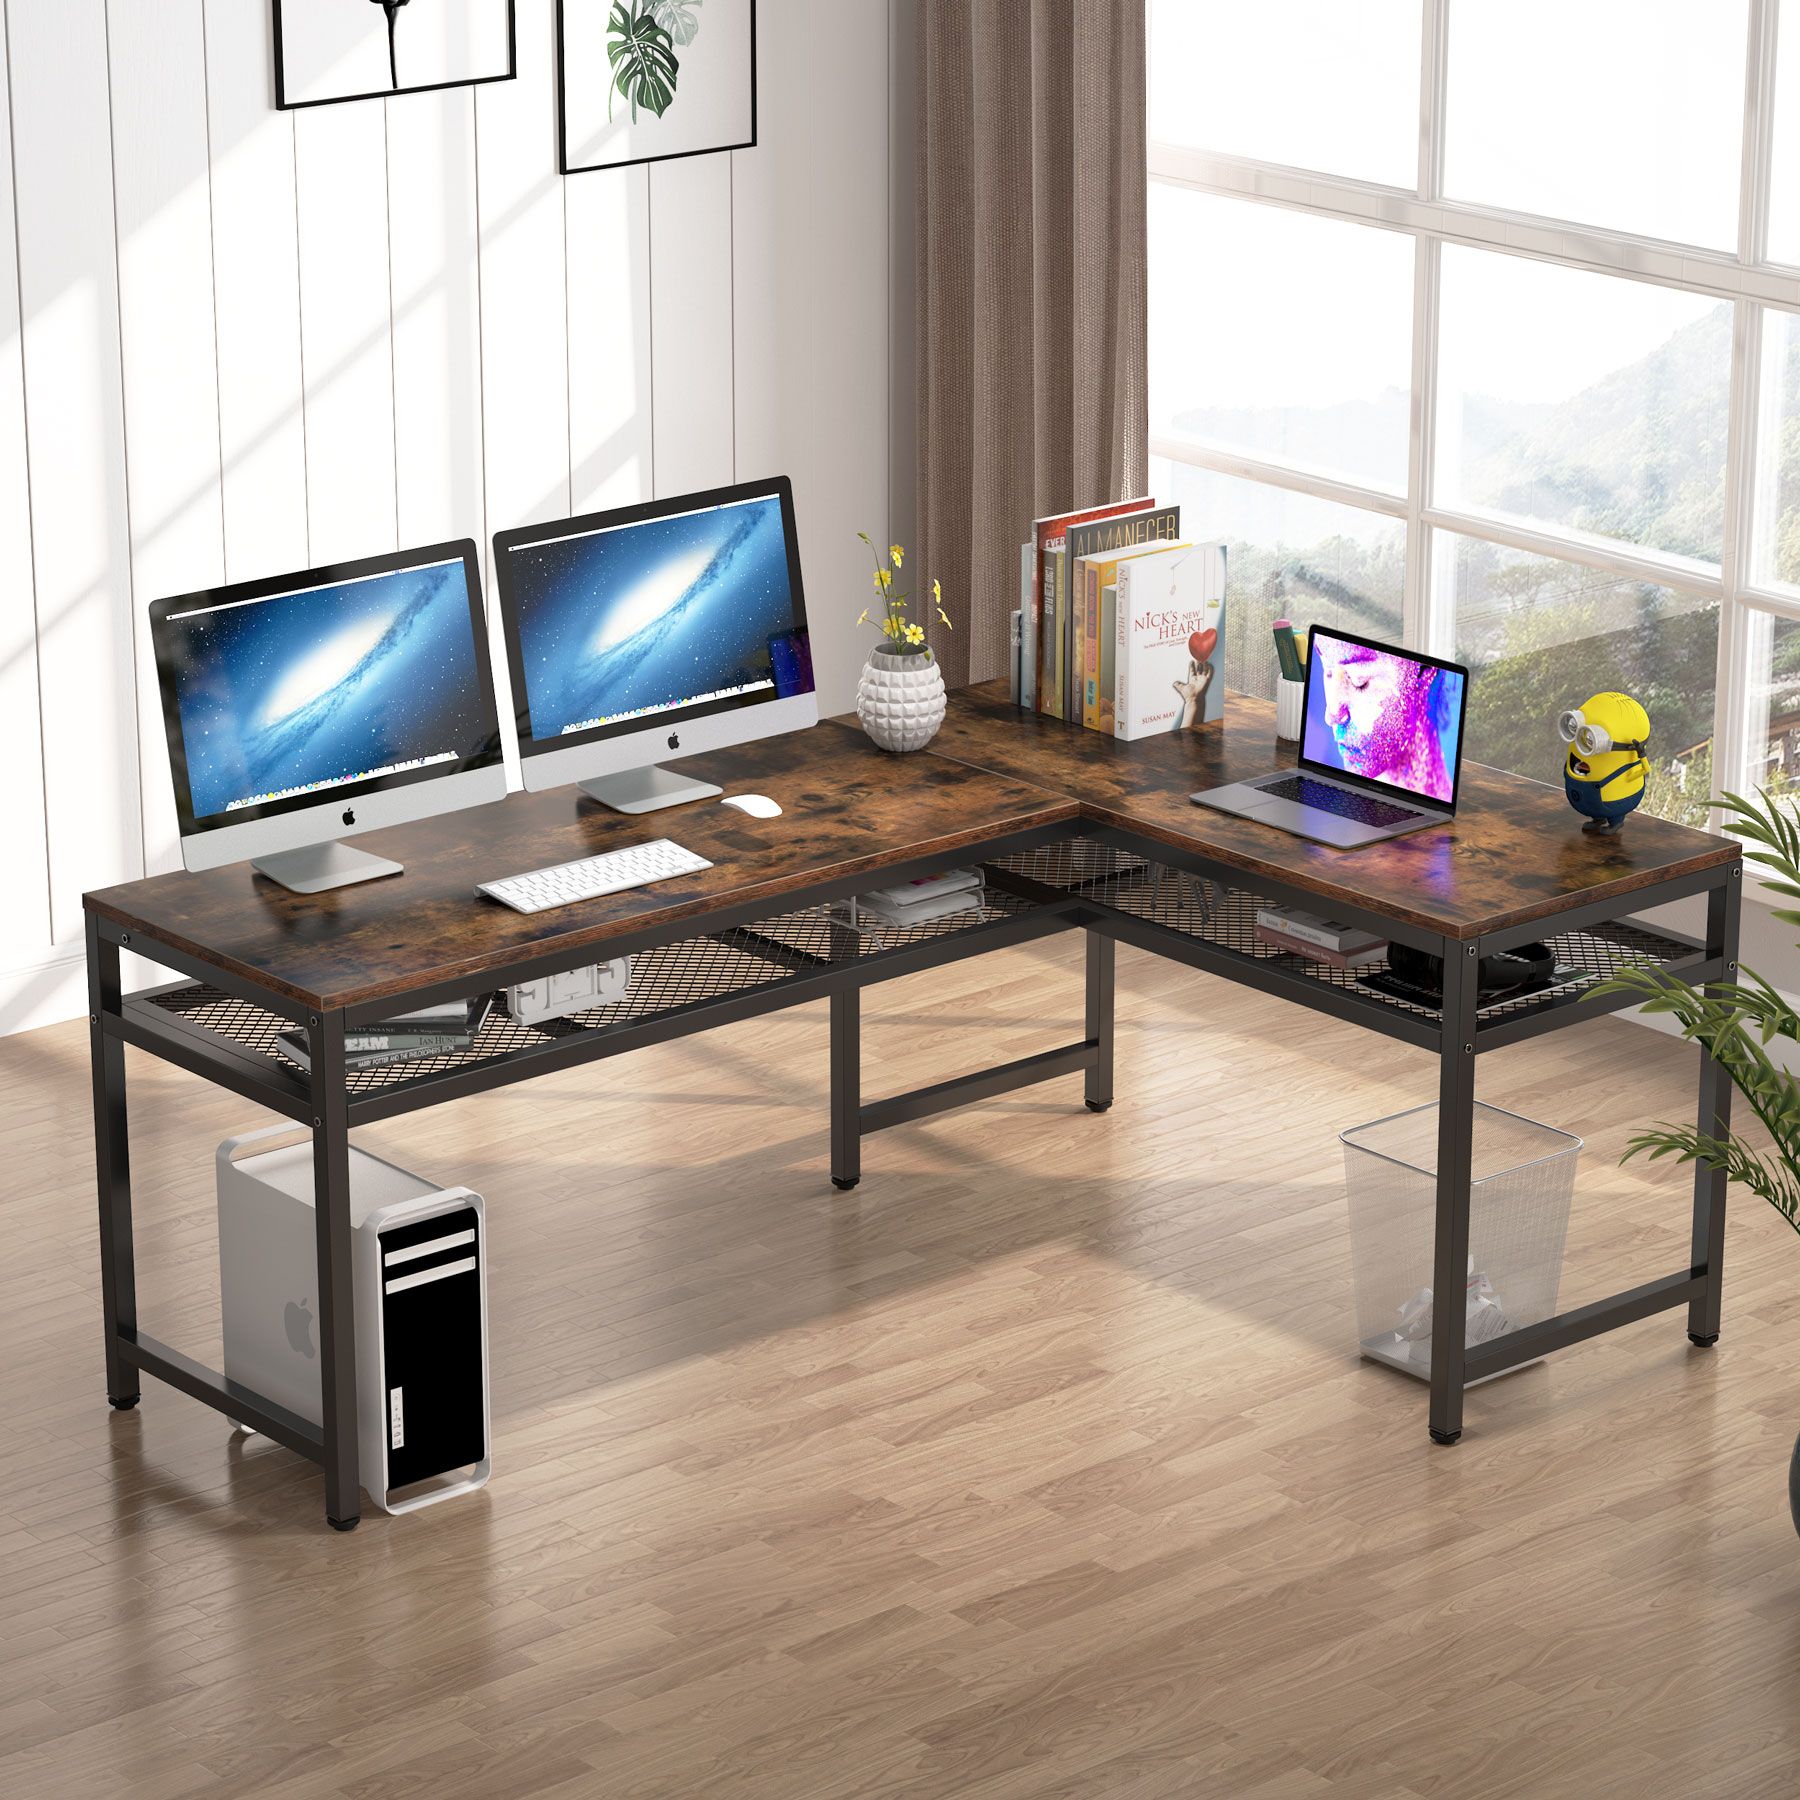 Tribesigns L Shaped Desk With Storage Shelf, Rustic 66 Inch Corner Pertaining To Rustic Brown Corner Desks (View 12 of 15)